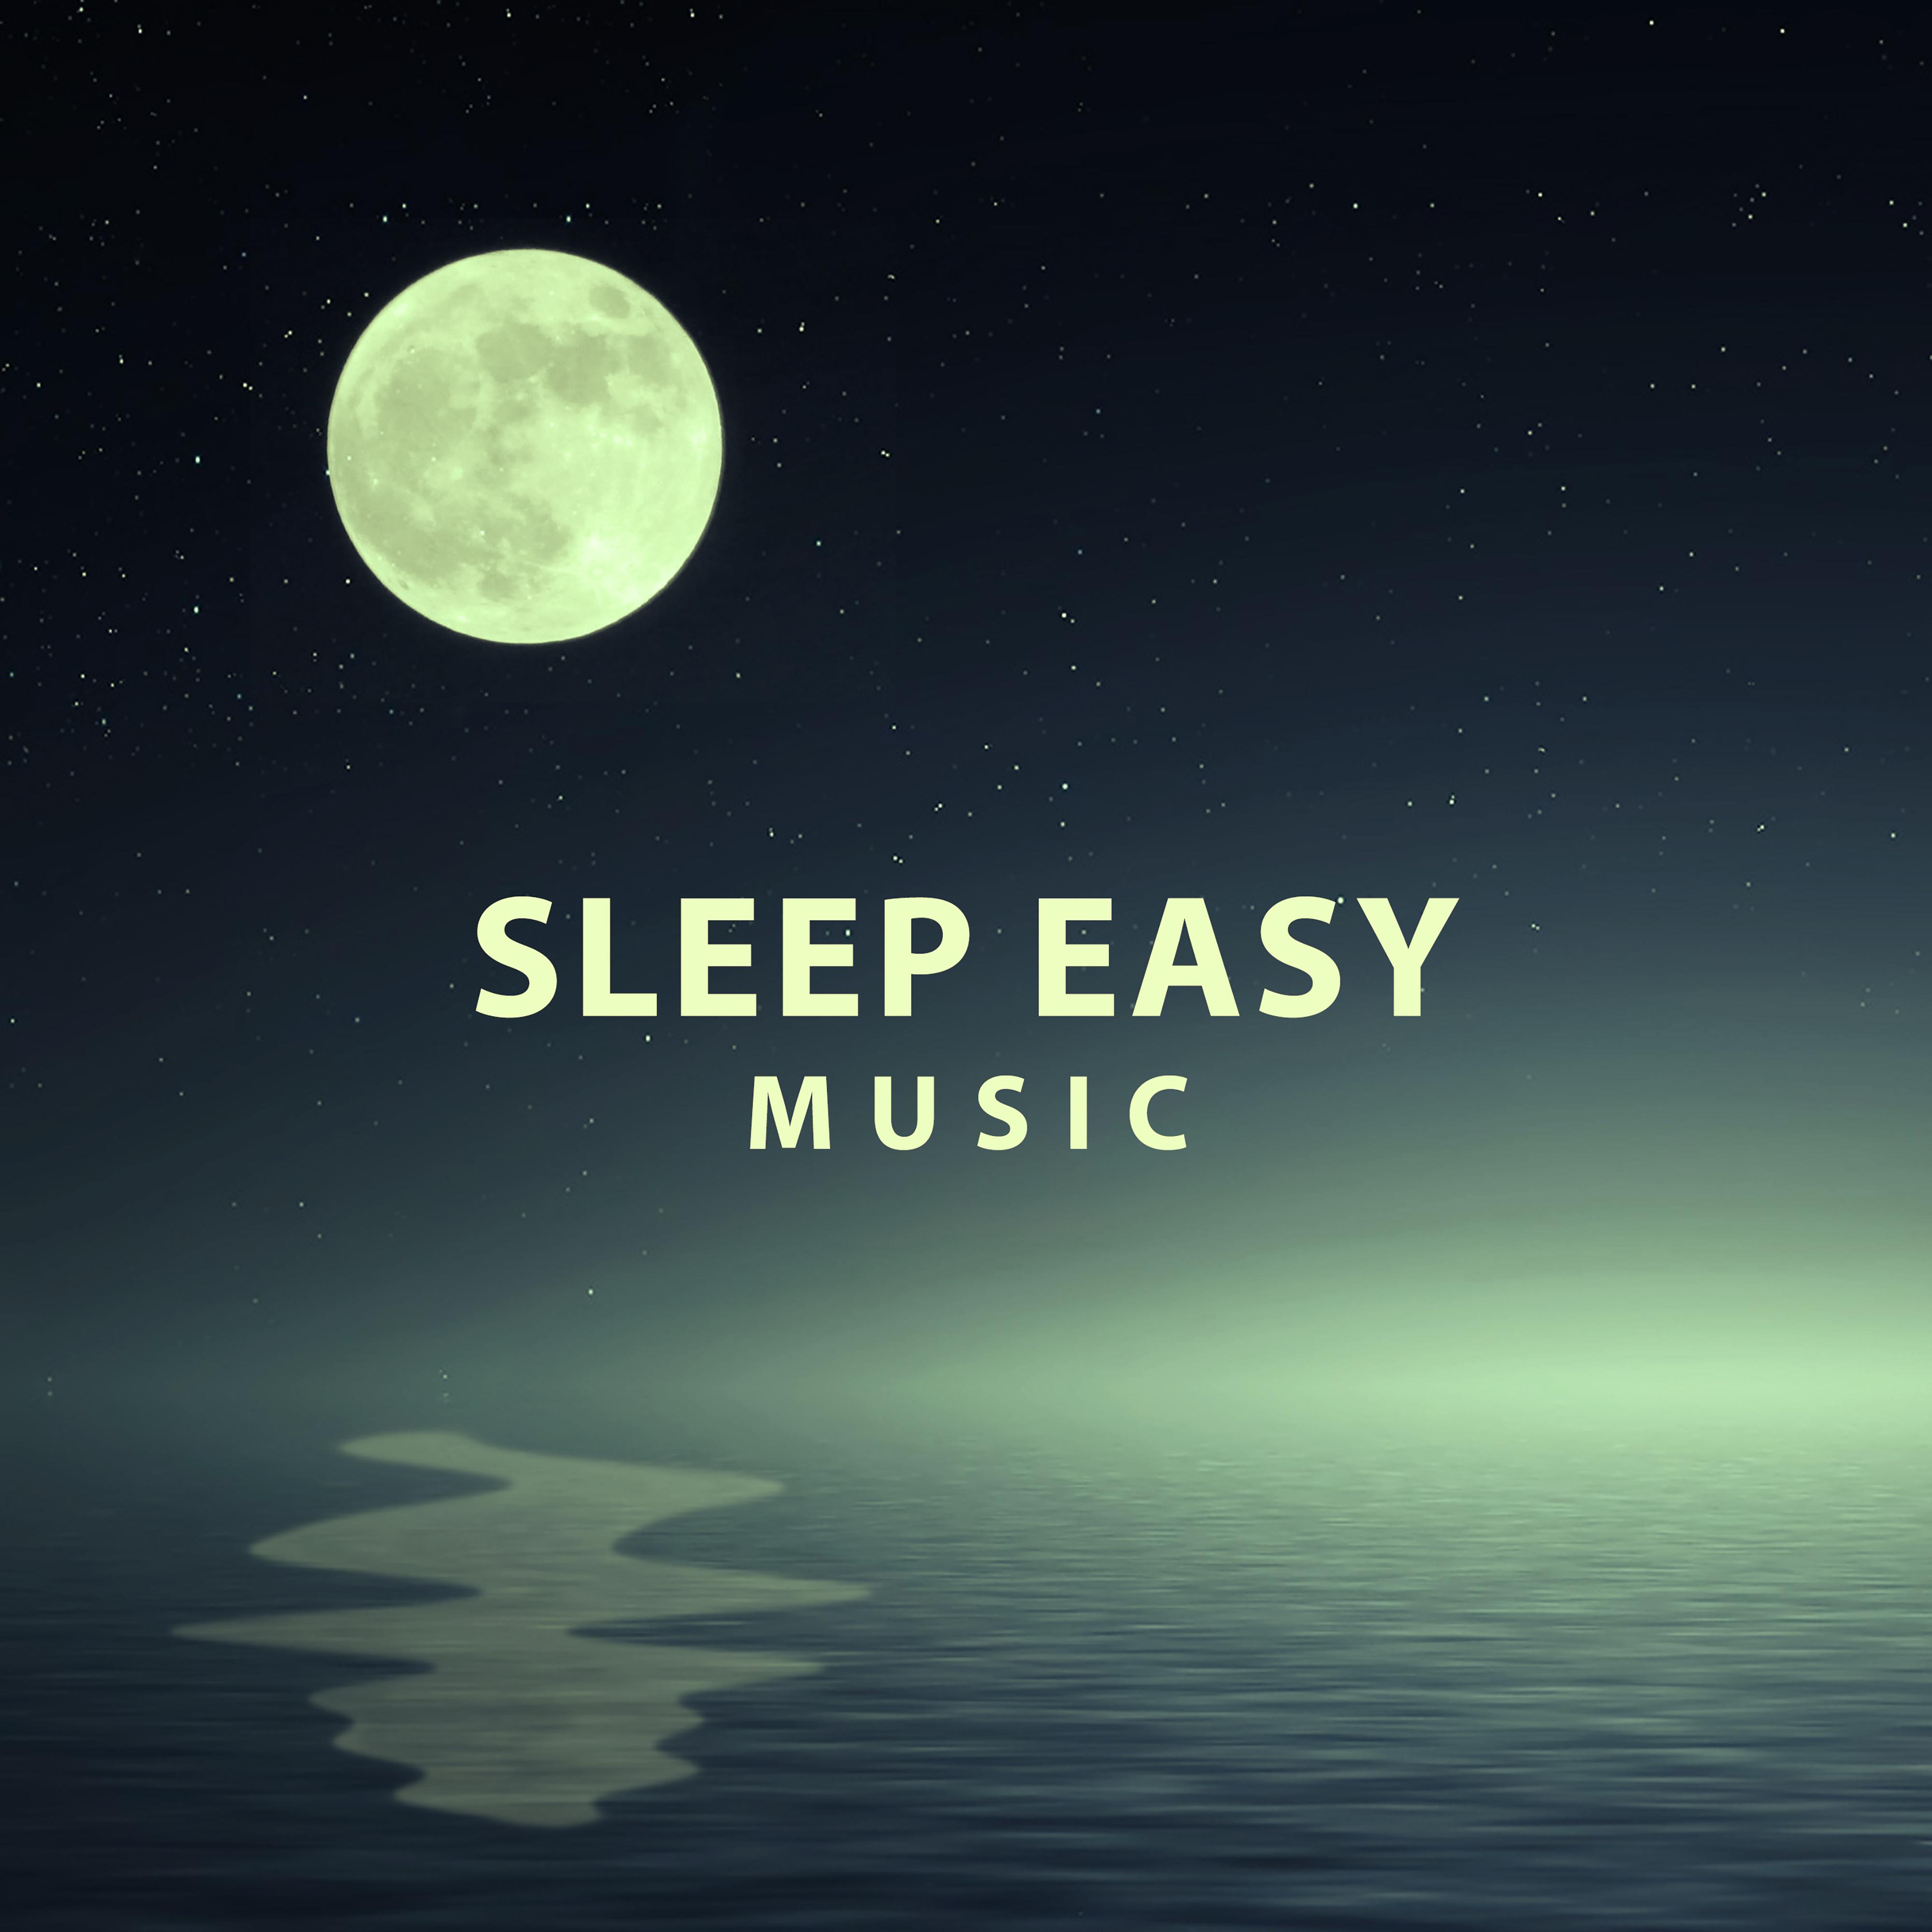 Sleep Easy Music – Bedtime, Sweet Nap, Relaxing Therapy, Calming Sounds for Sleep, Stress Free, Lullabies at Night